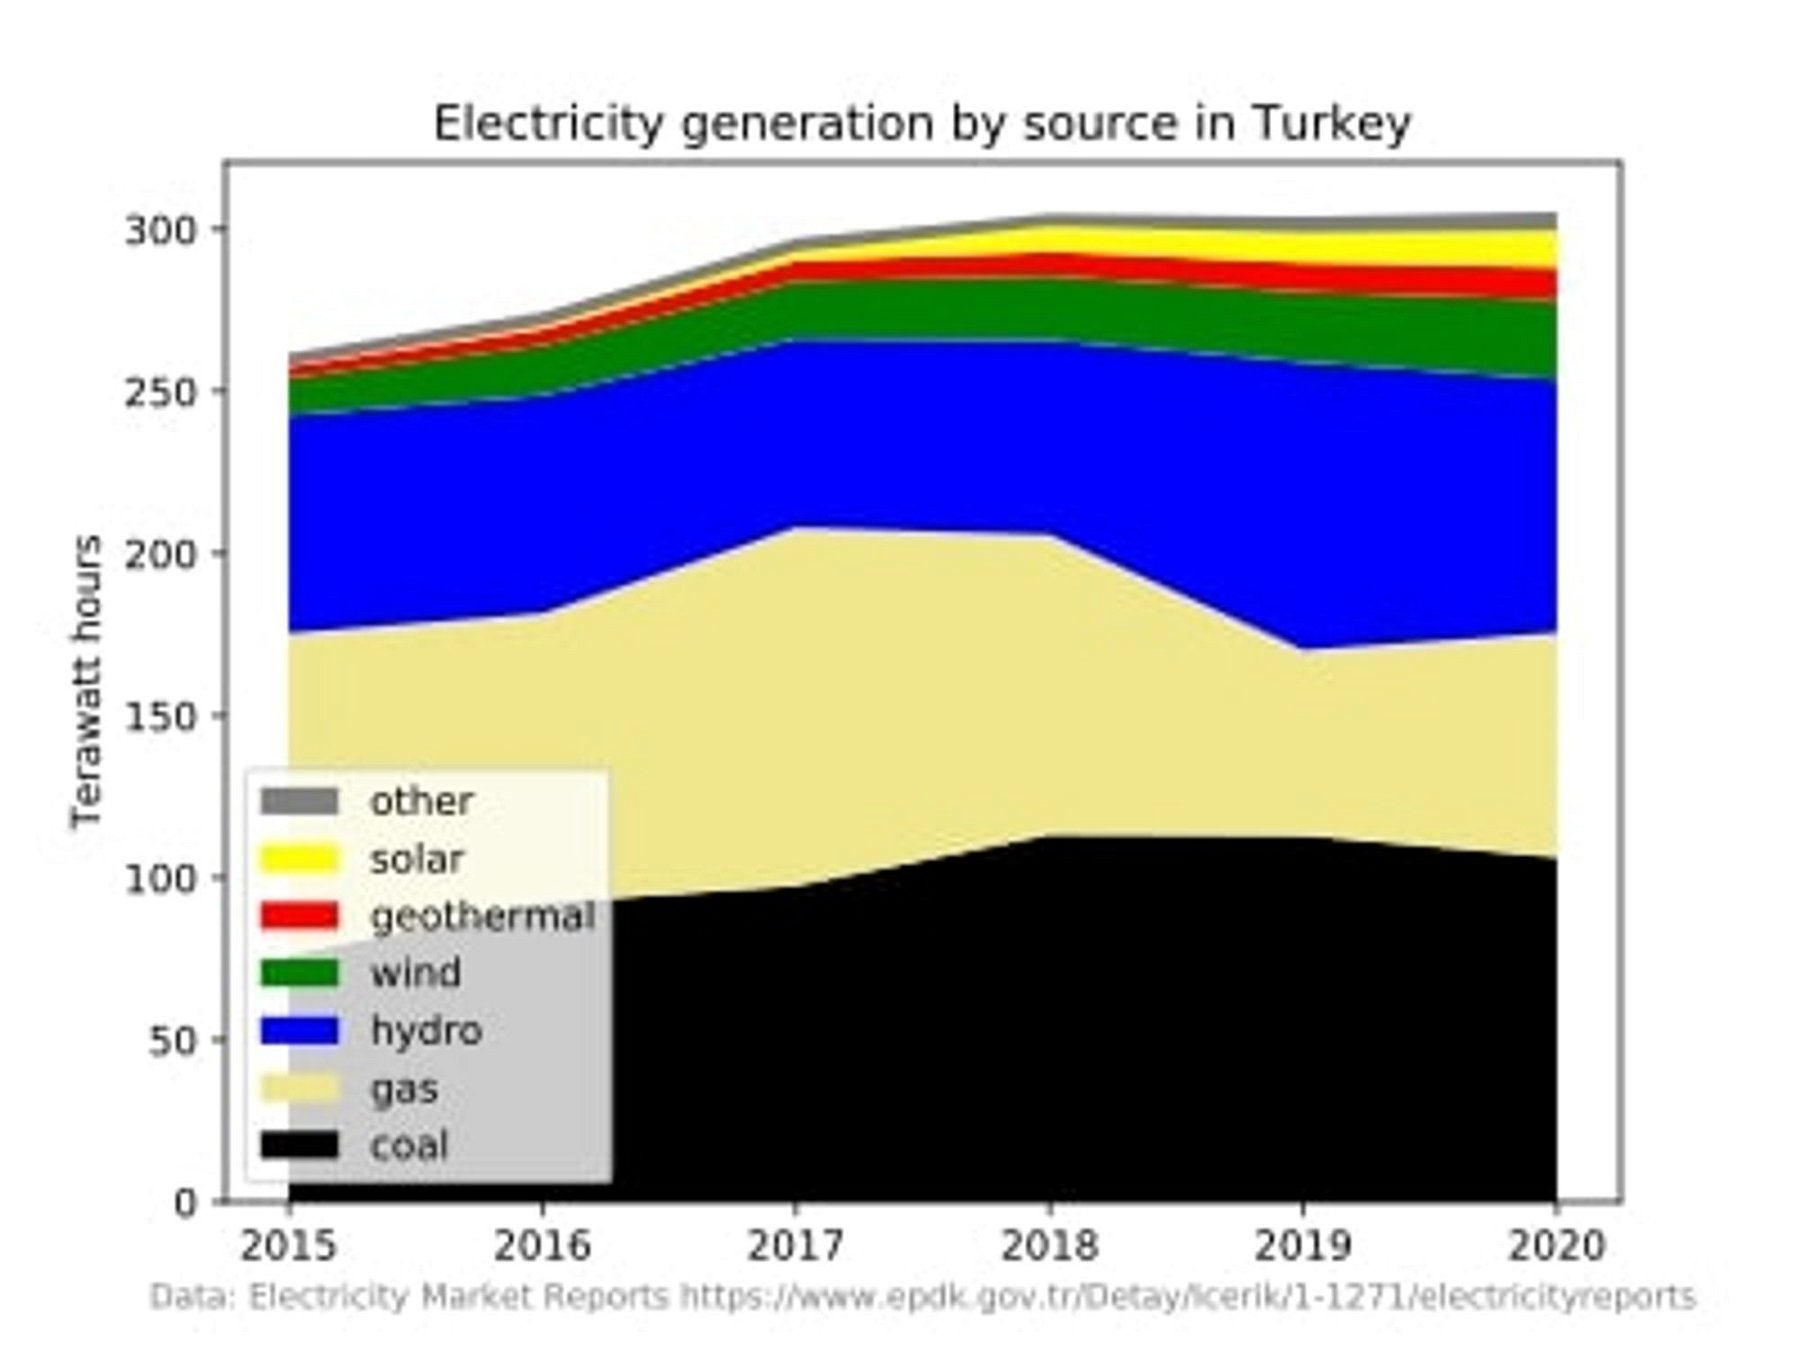 Electricity generation by sources in Turkey